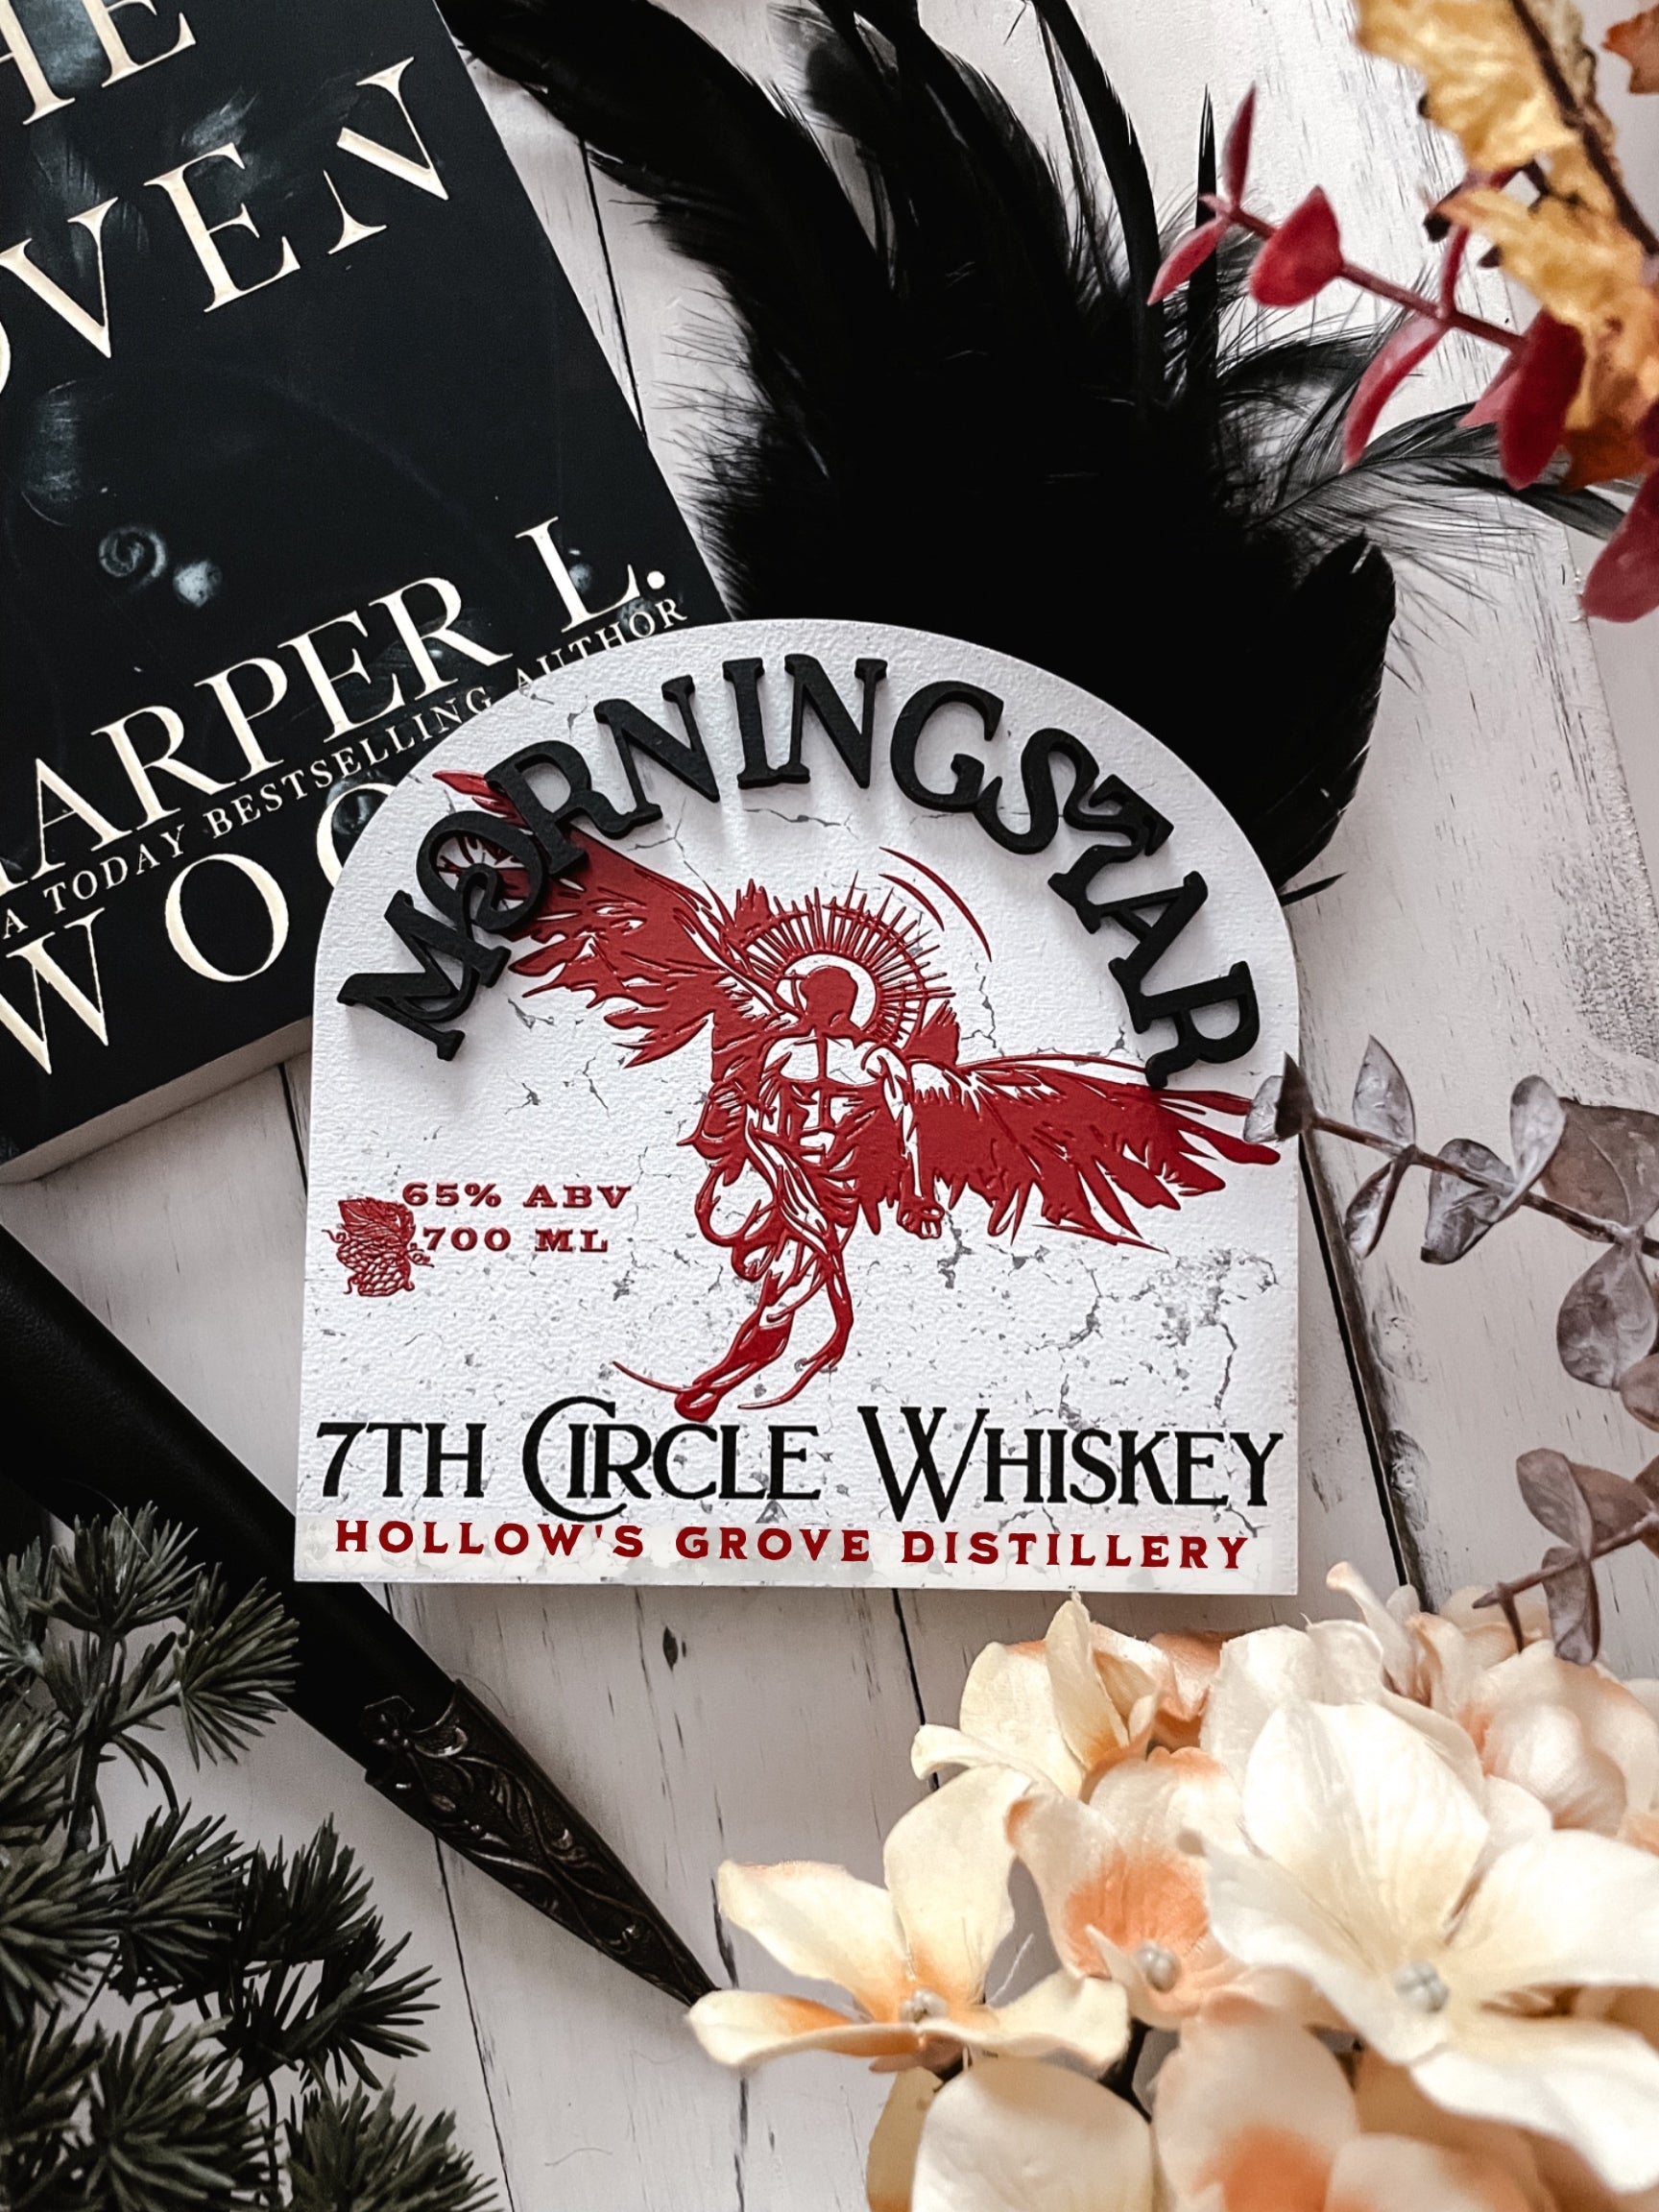 Morningstar 7th Circle Whiskey sign - Harper L. Woods, created by FireDrake Artistry™